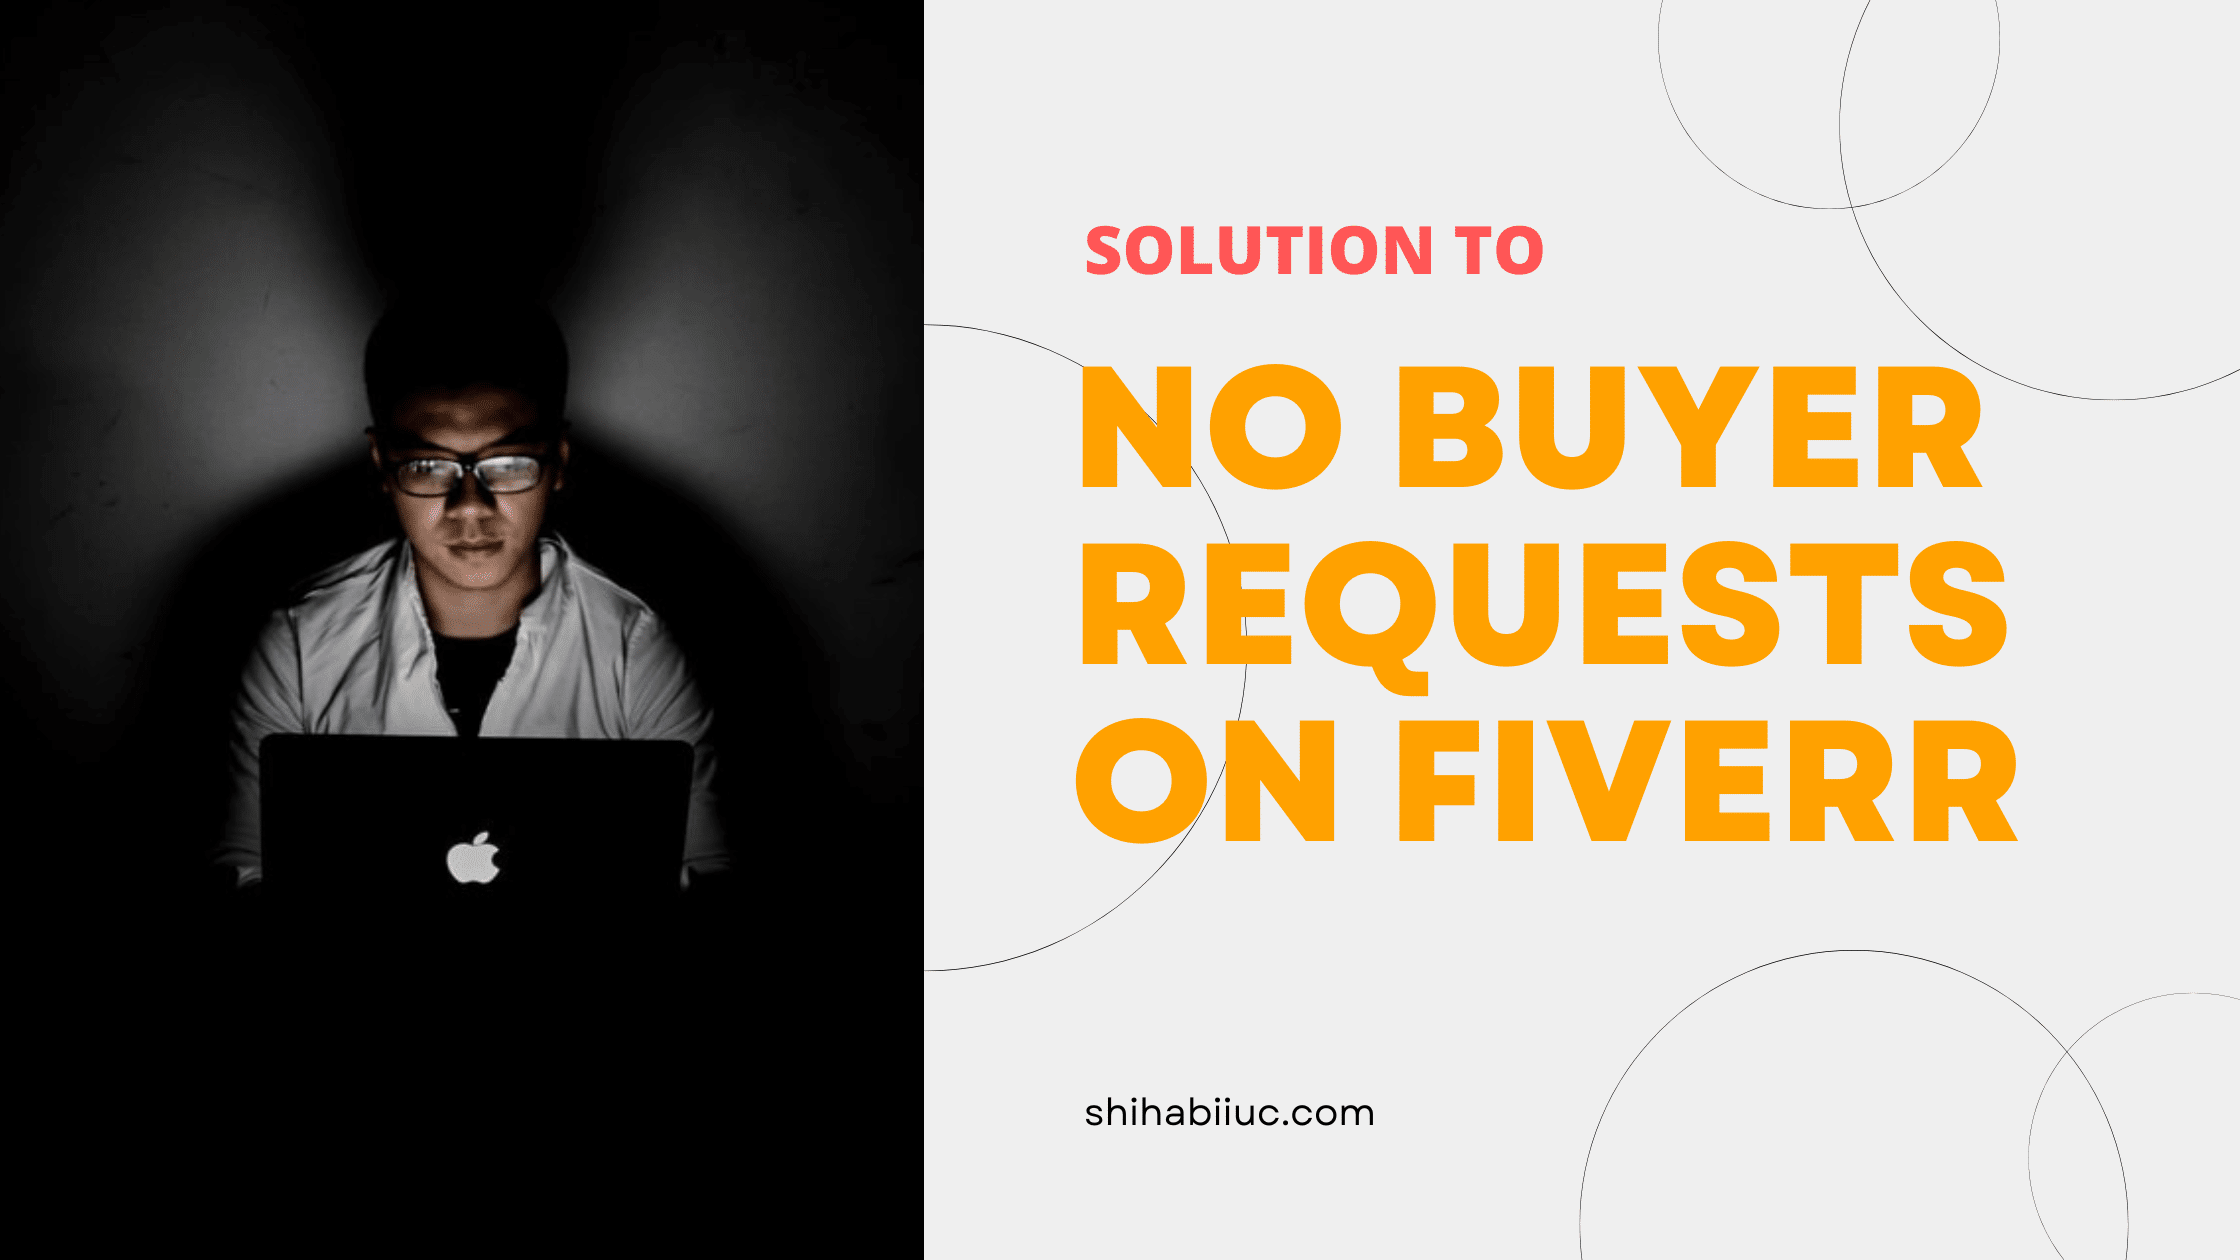 Solution to "No buyer requests" on Fiverr